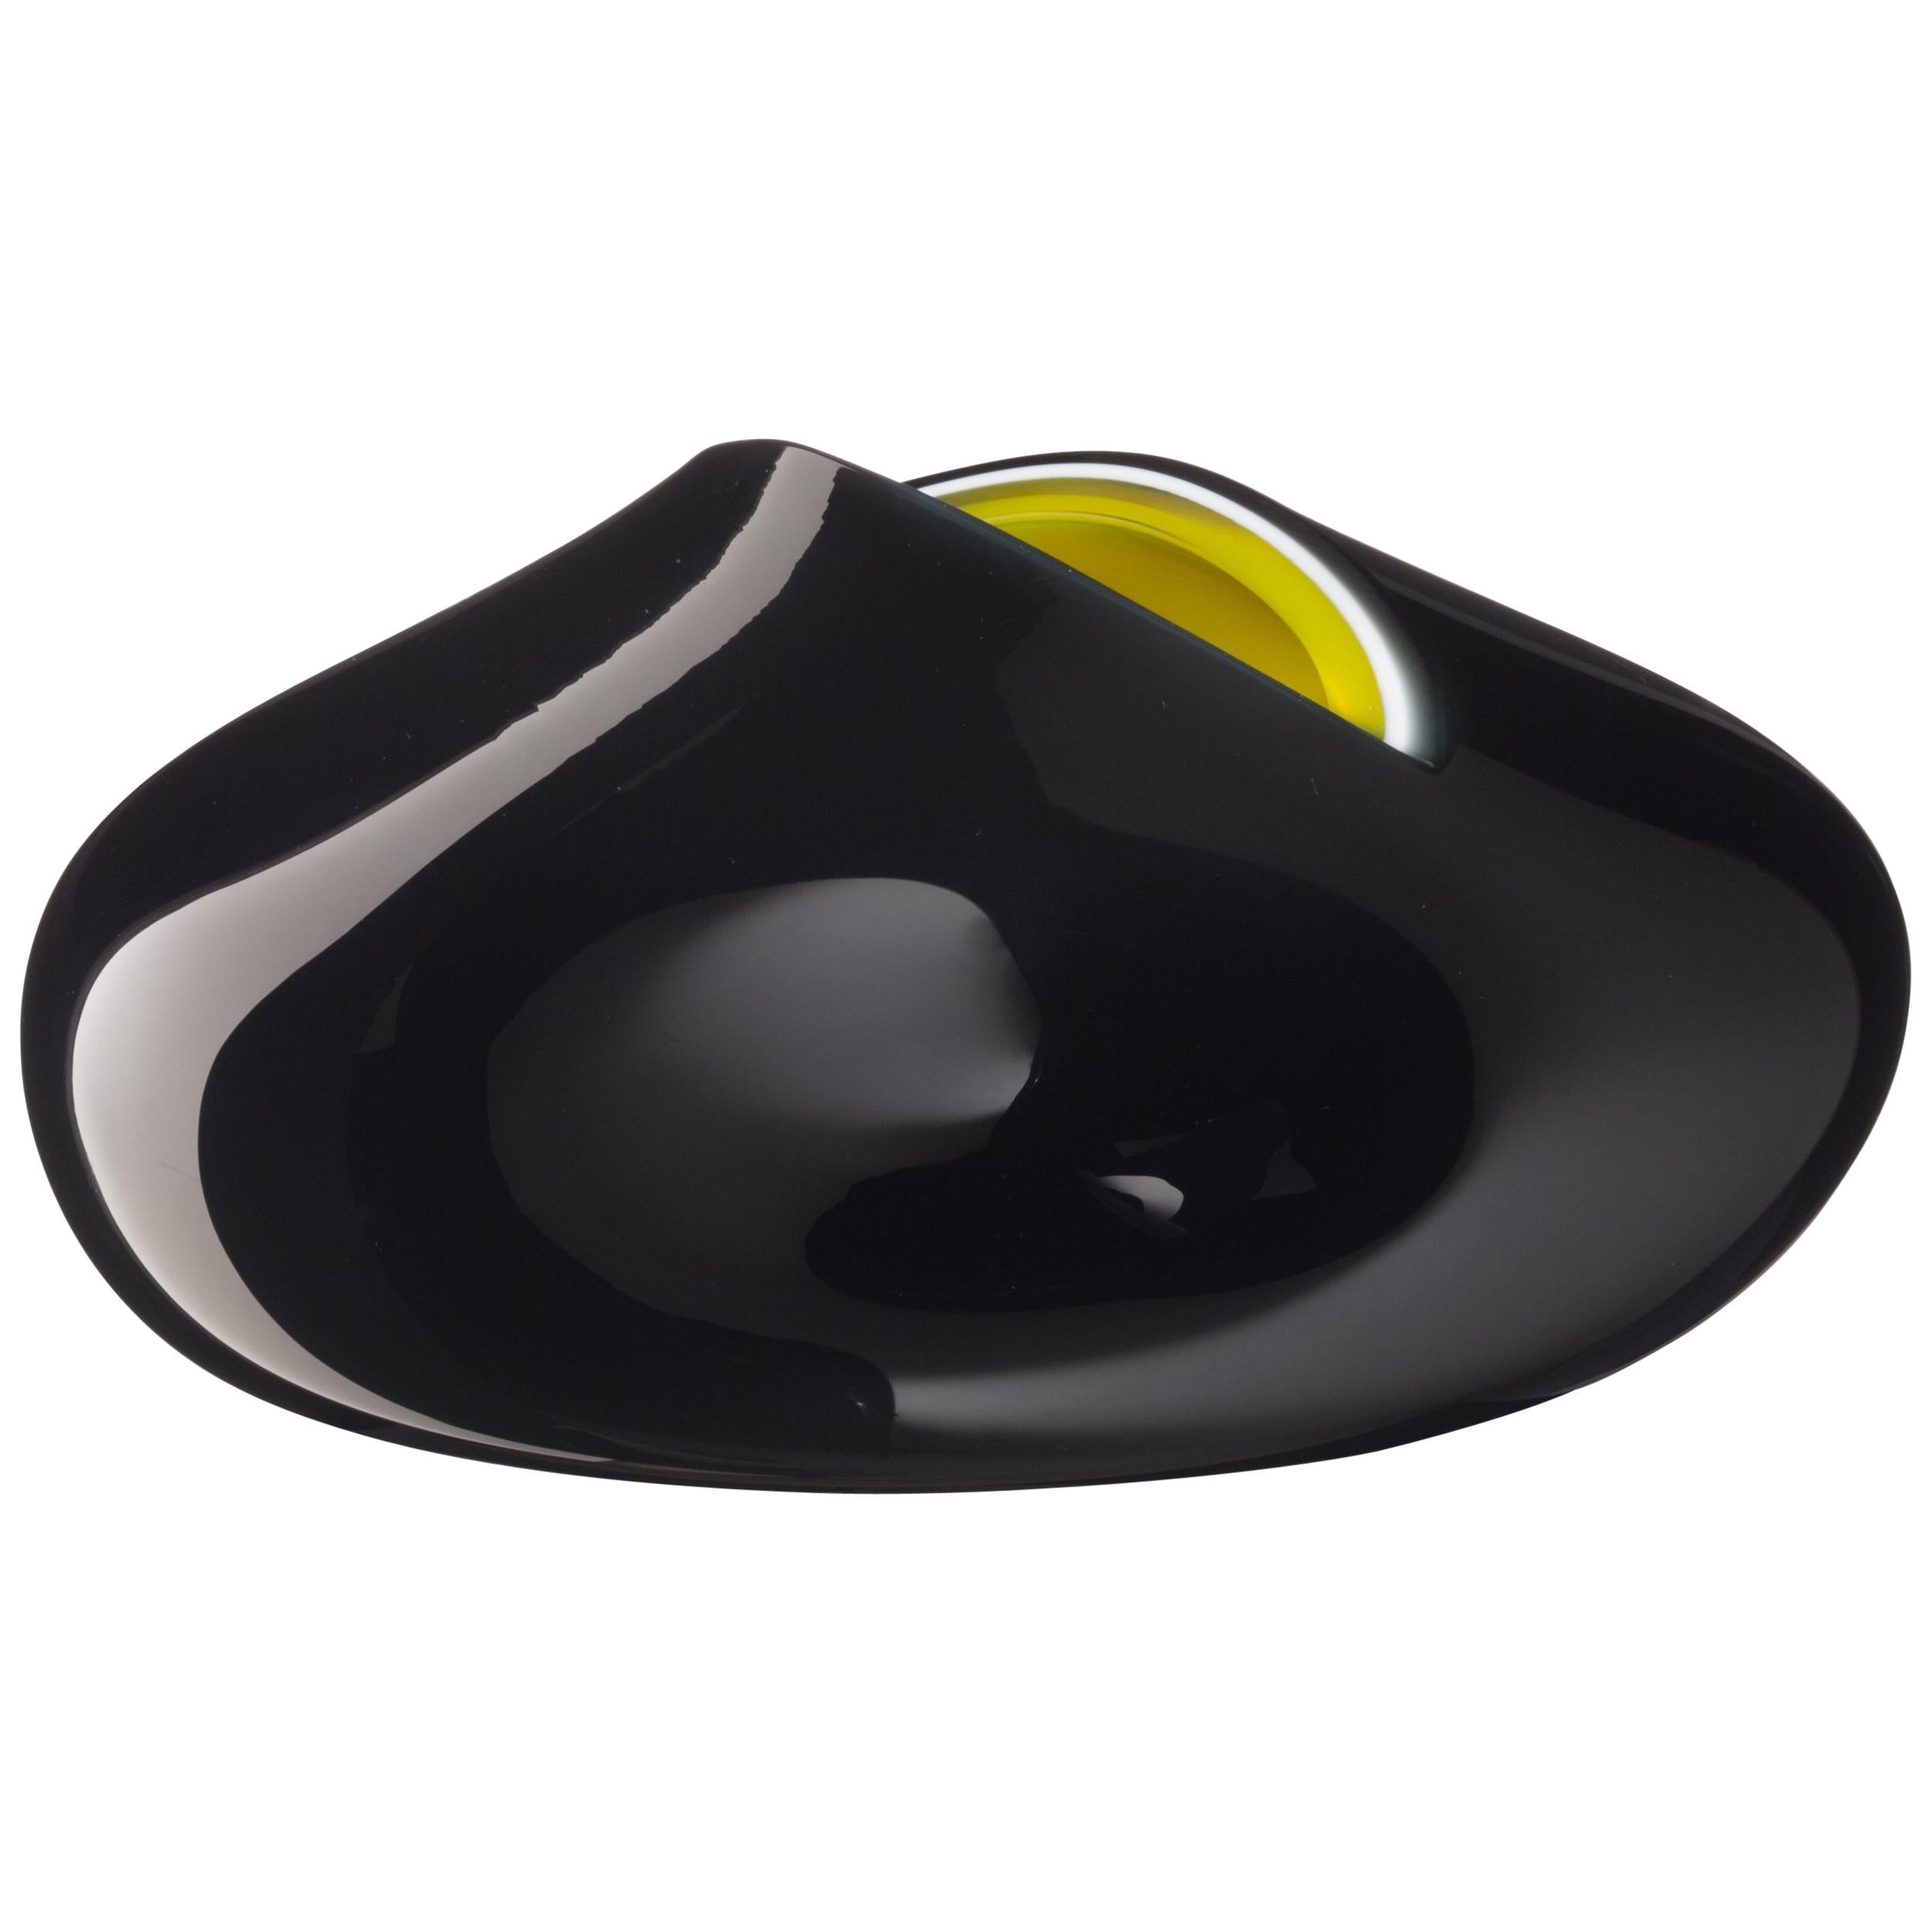 Salviati Large Saxi Vase in Black and Yellow by Norberto Moretti im Angebot